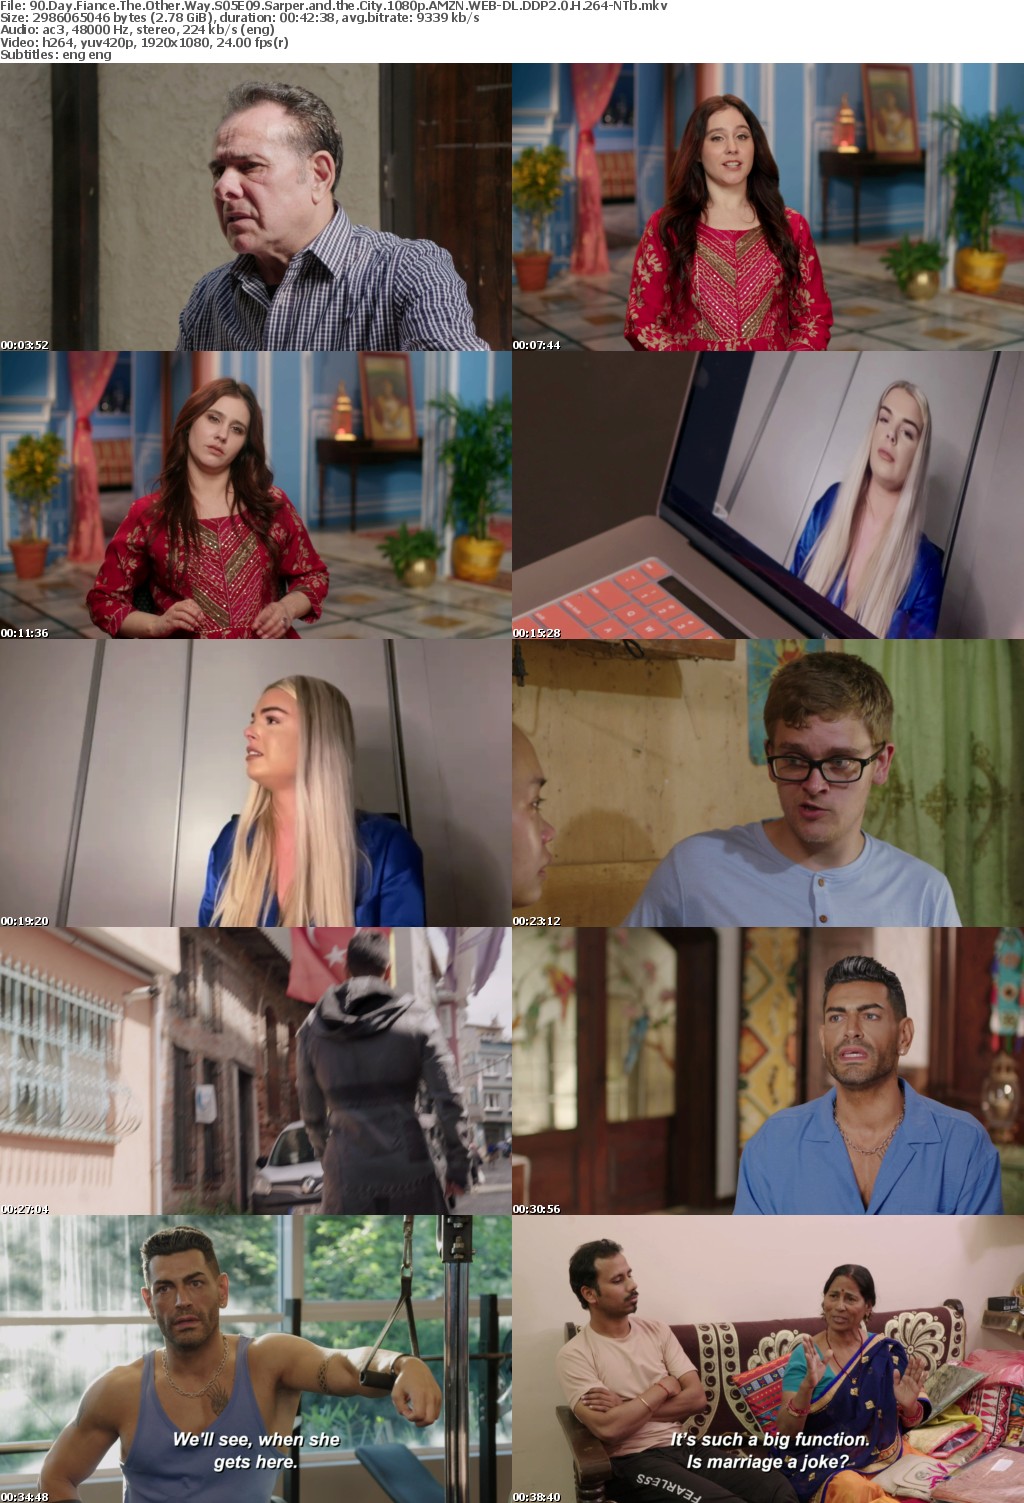 90 Day Fiance The Other Way S05E09 Sarper and the City 1080p AMZN WEB-DL DDP2 0 H 264-NTb